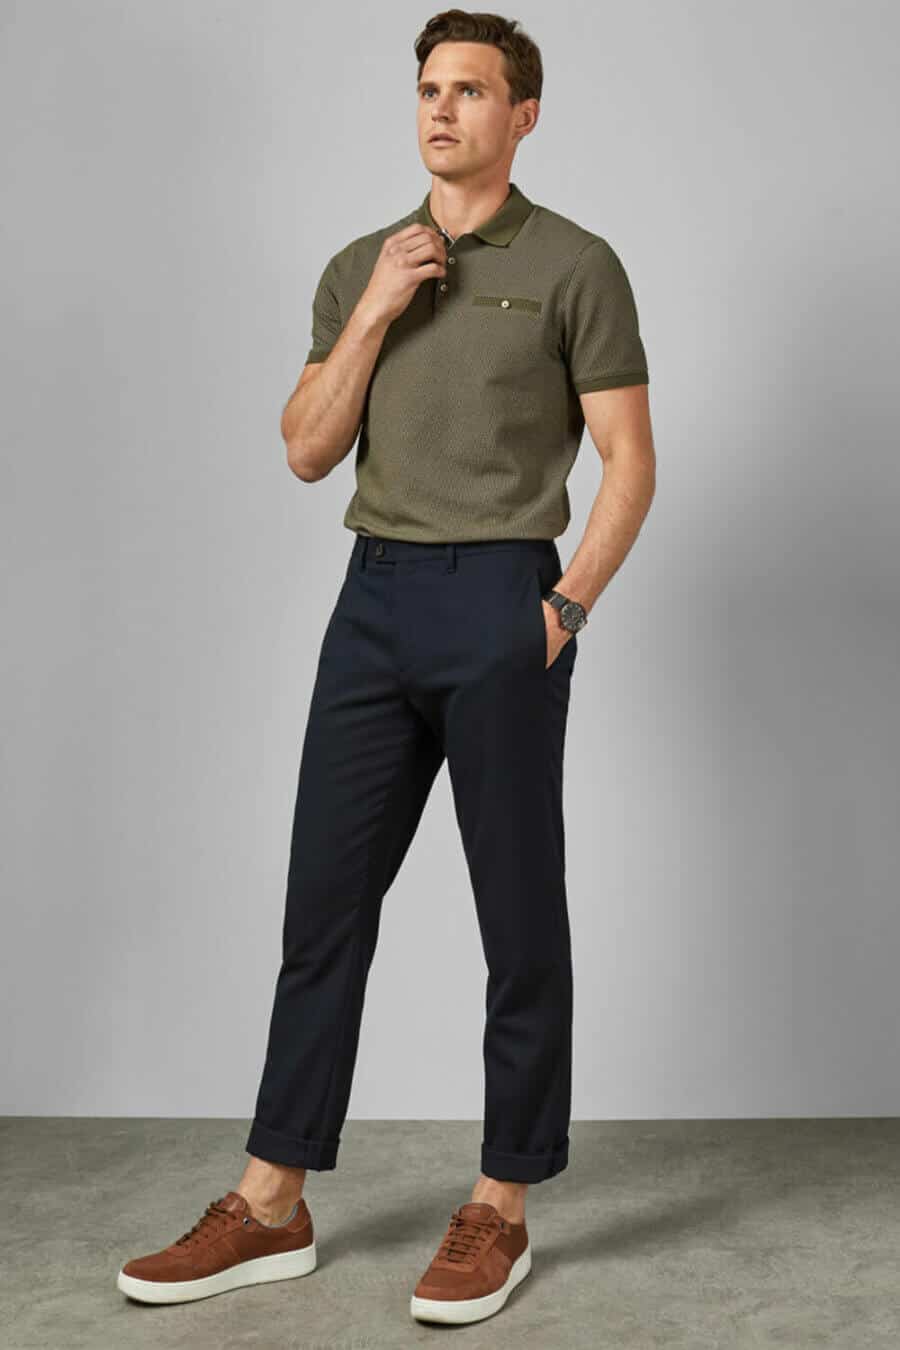 Men's tucked in polo shirt, chinos and sneakers outfit